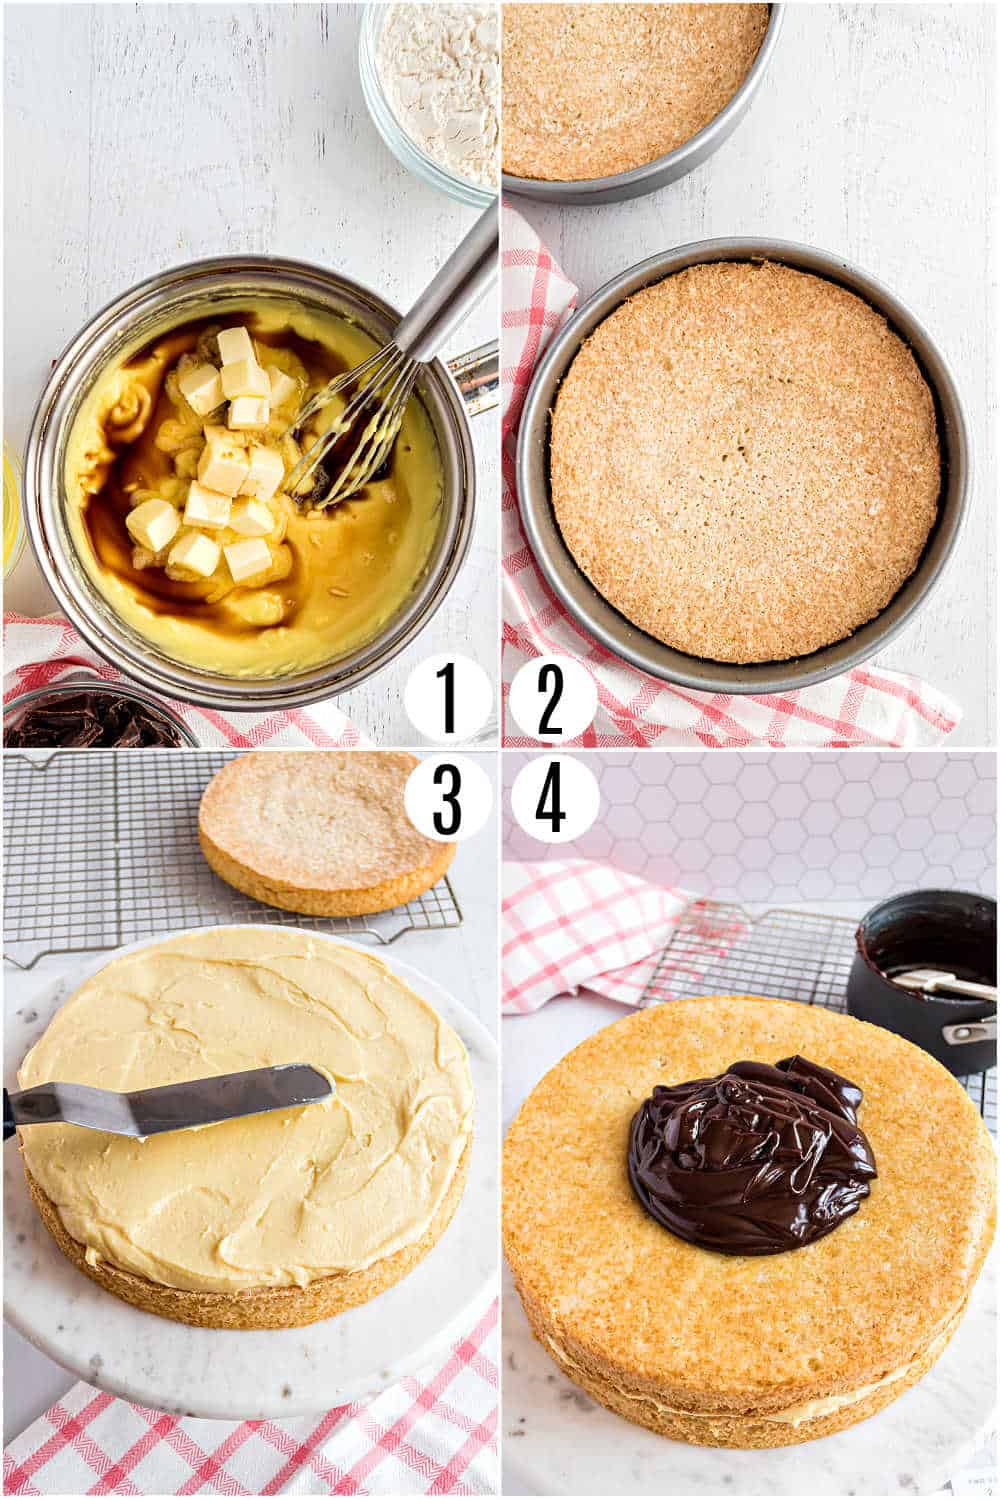 Step by step photos showing how to make boston cream pie.